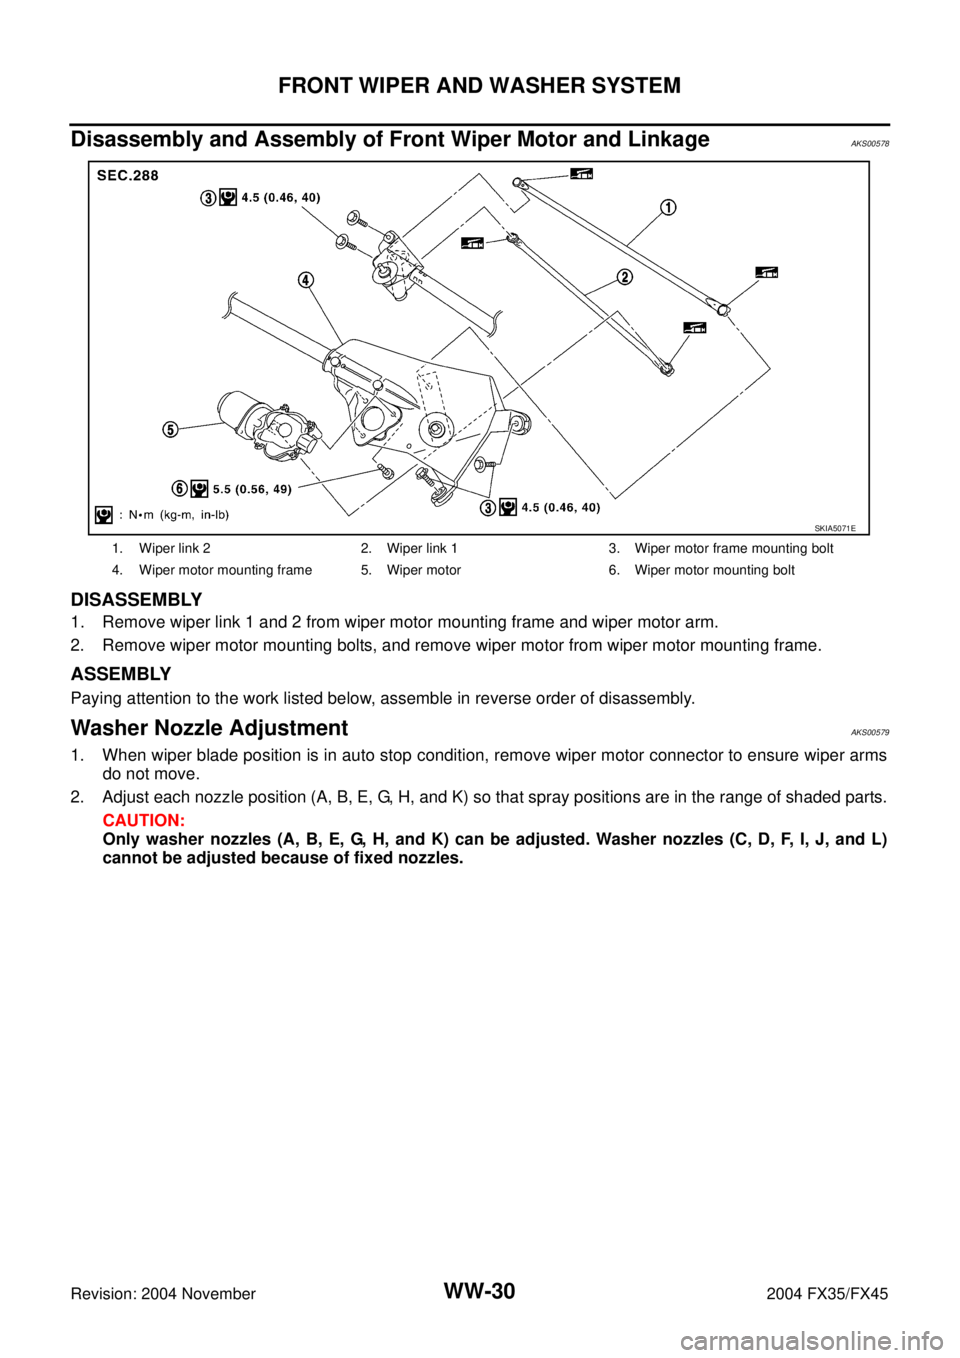 INFINITI FX35 2004  Service Manual WW-30
FRONT WIPER AND WASHER SYSTEM
Revision: 2004 November 2004 FX35/FX45
Disassembly and Assembly of Front Wiper Motor and LinkageAKS00578
DISASSEMBLY
1. Remove wiper link 1 and 2 from wiper motor m